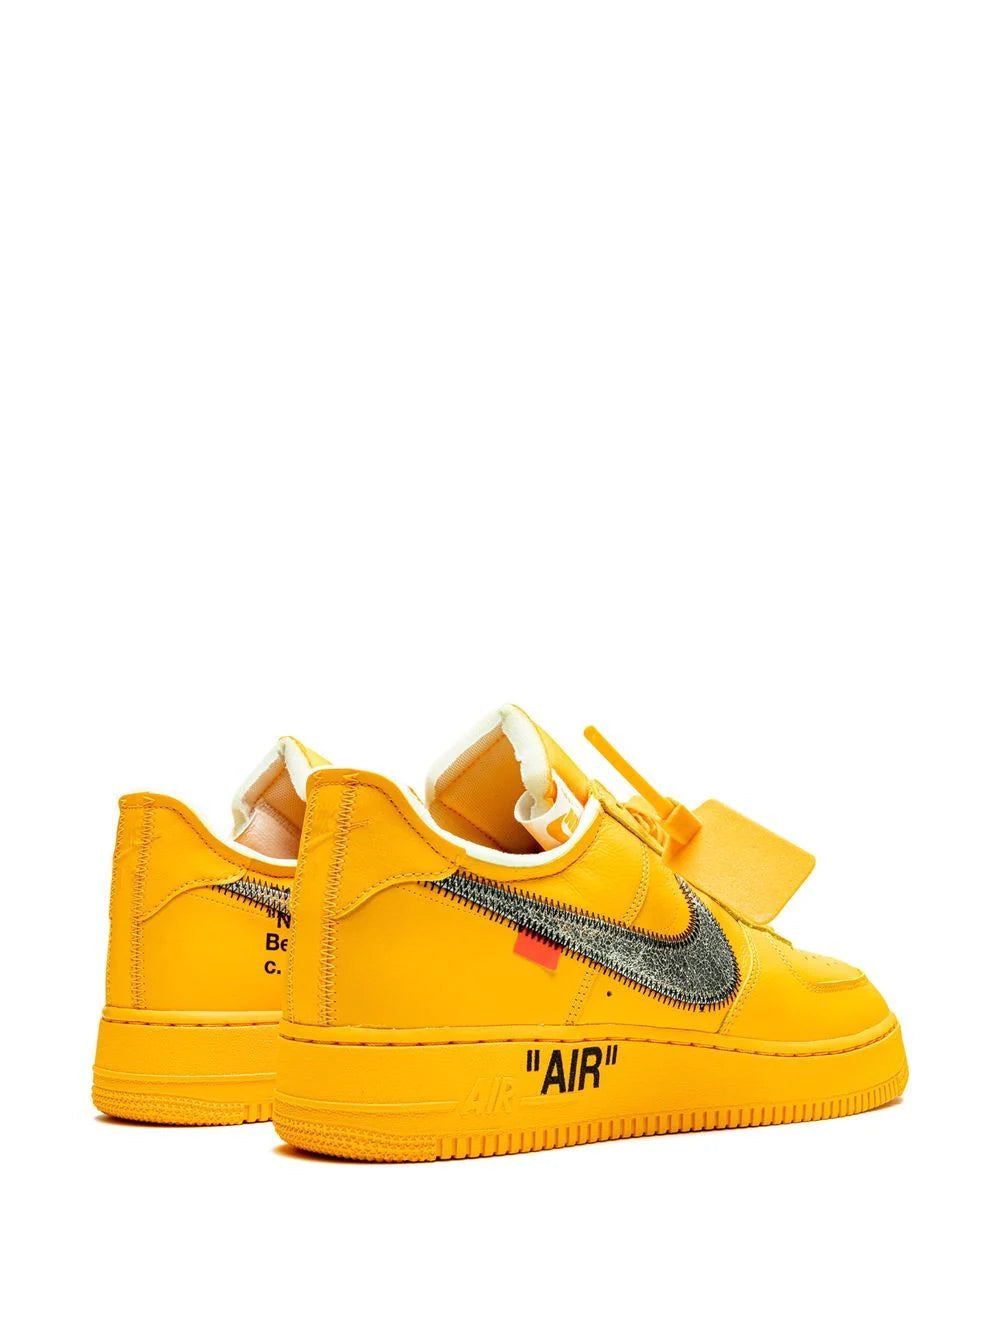 Nike x Off-White Air Force 1 Low "University Gold" sneakers